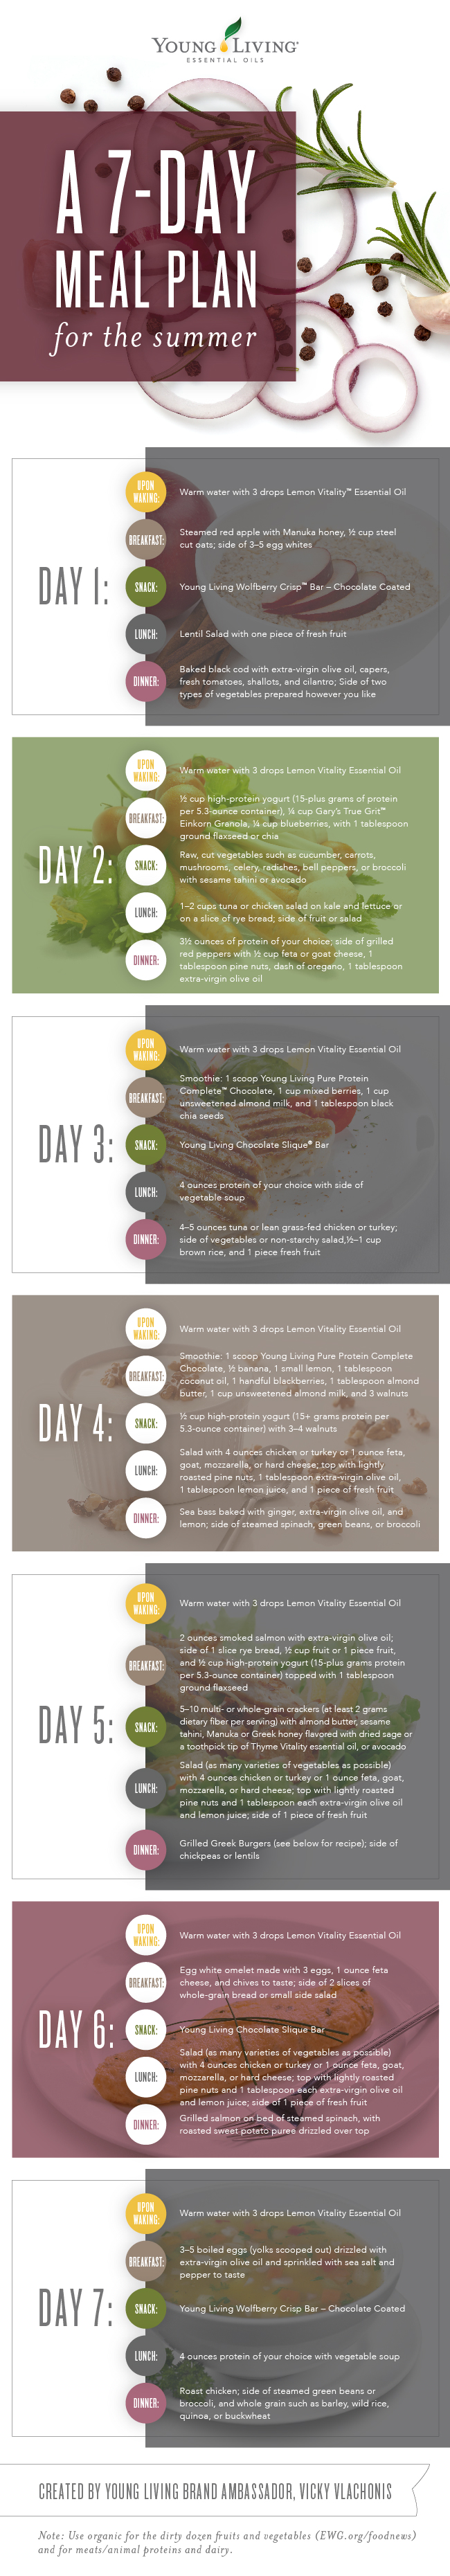 7-Day Meal Plan Infographic